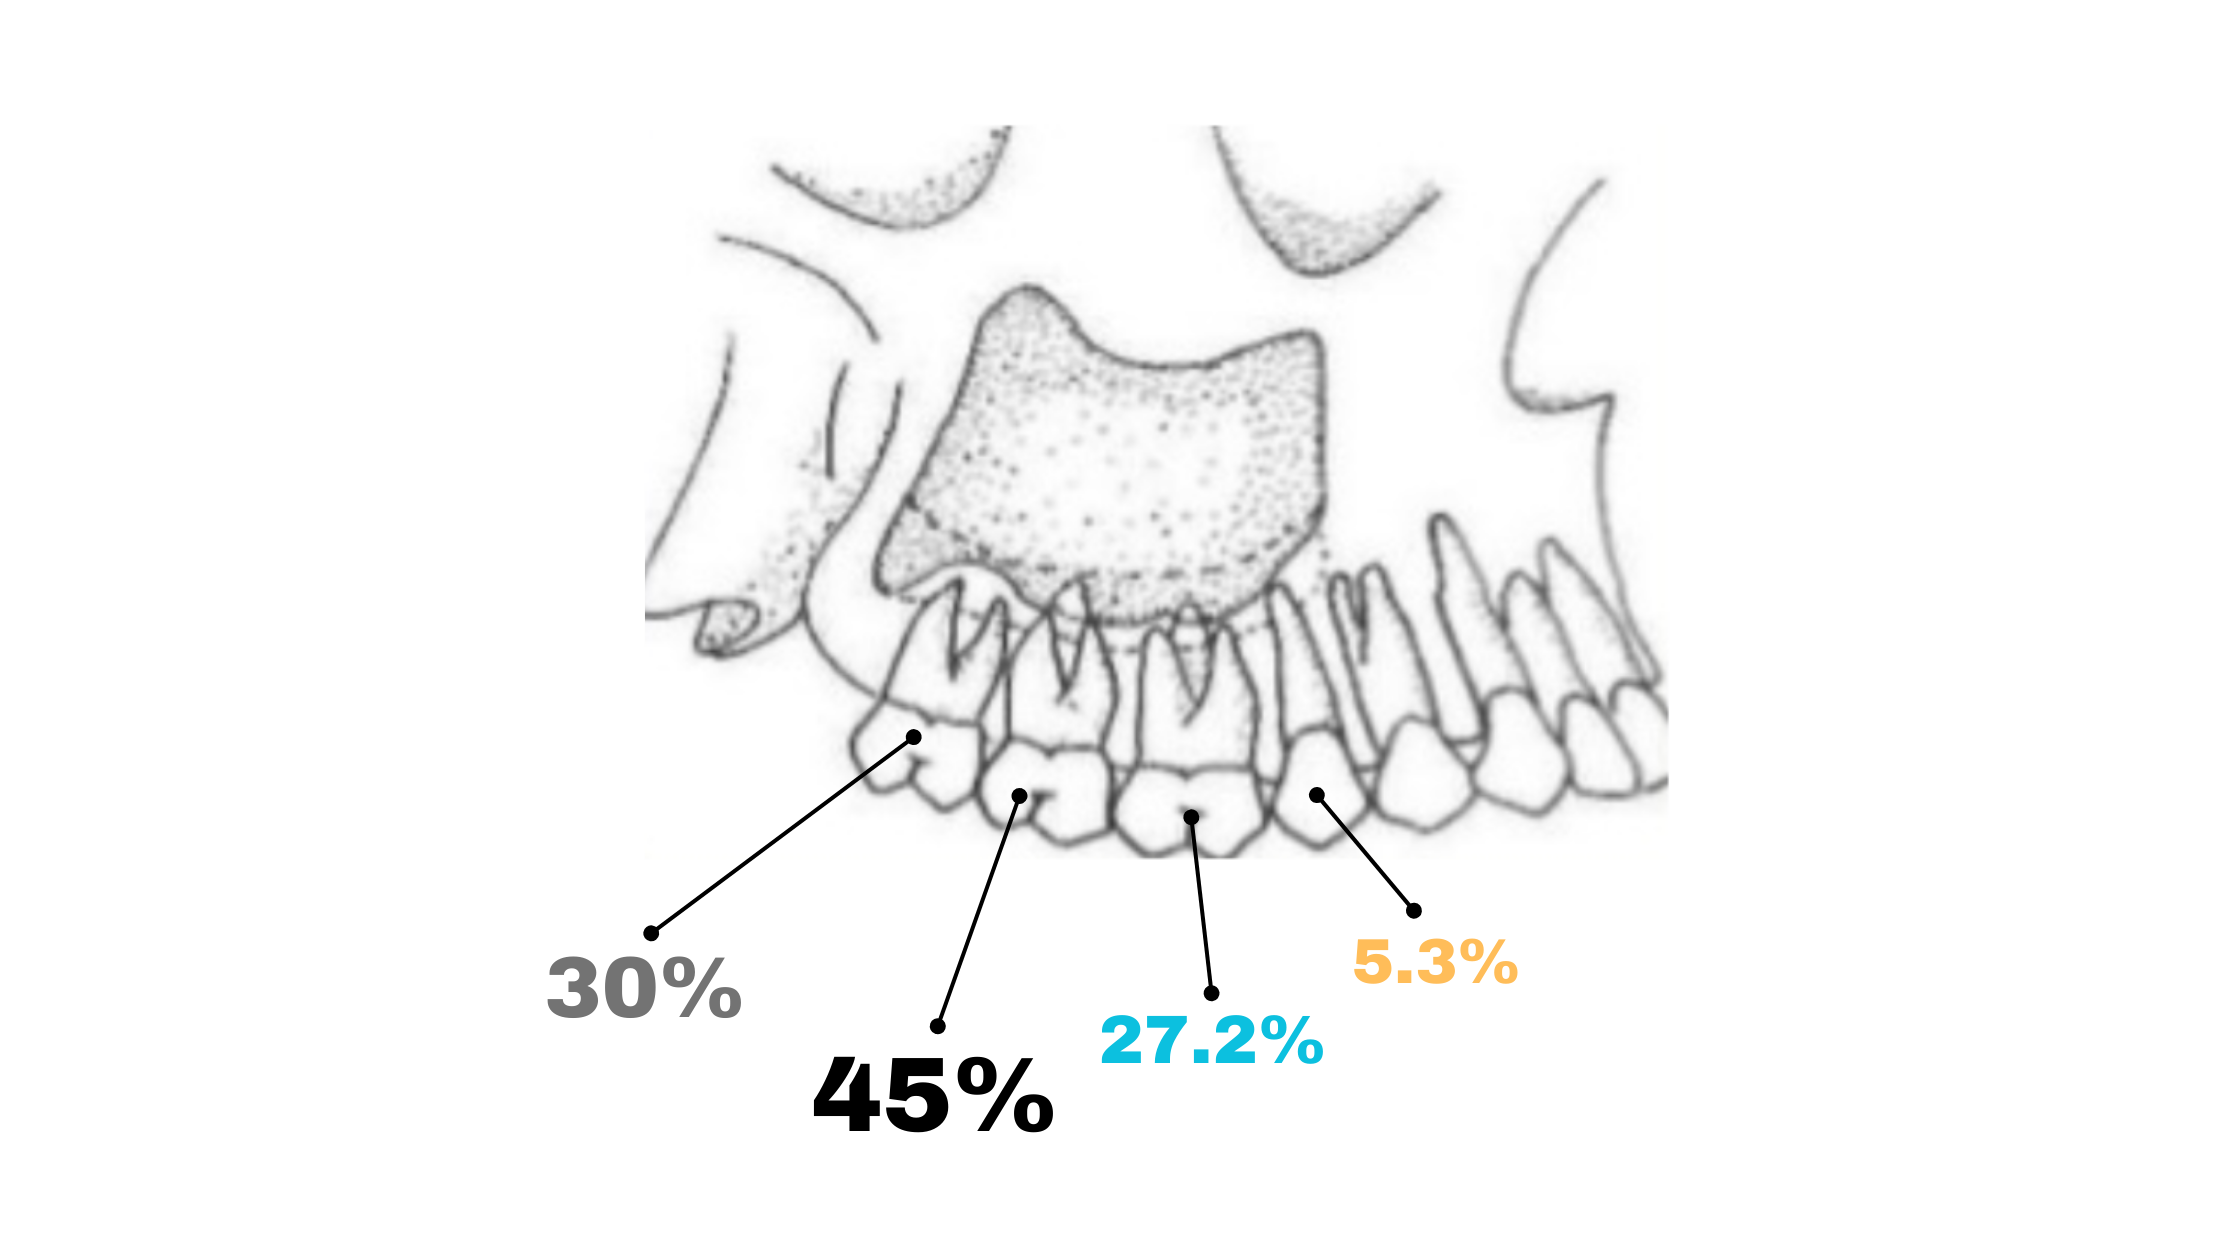 The upper back teeth most involved in sinus complication